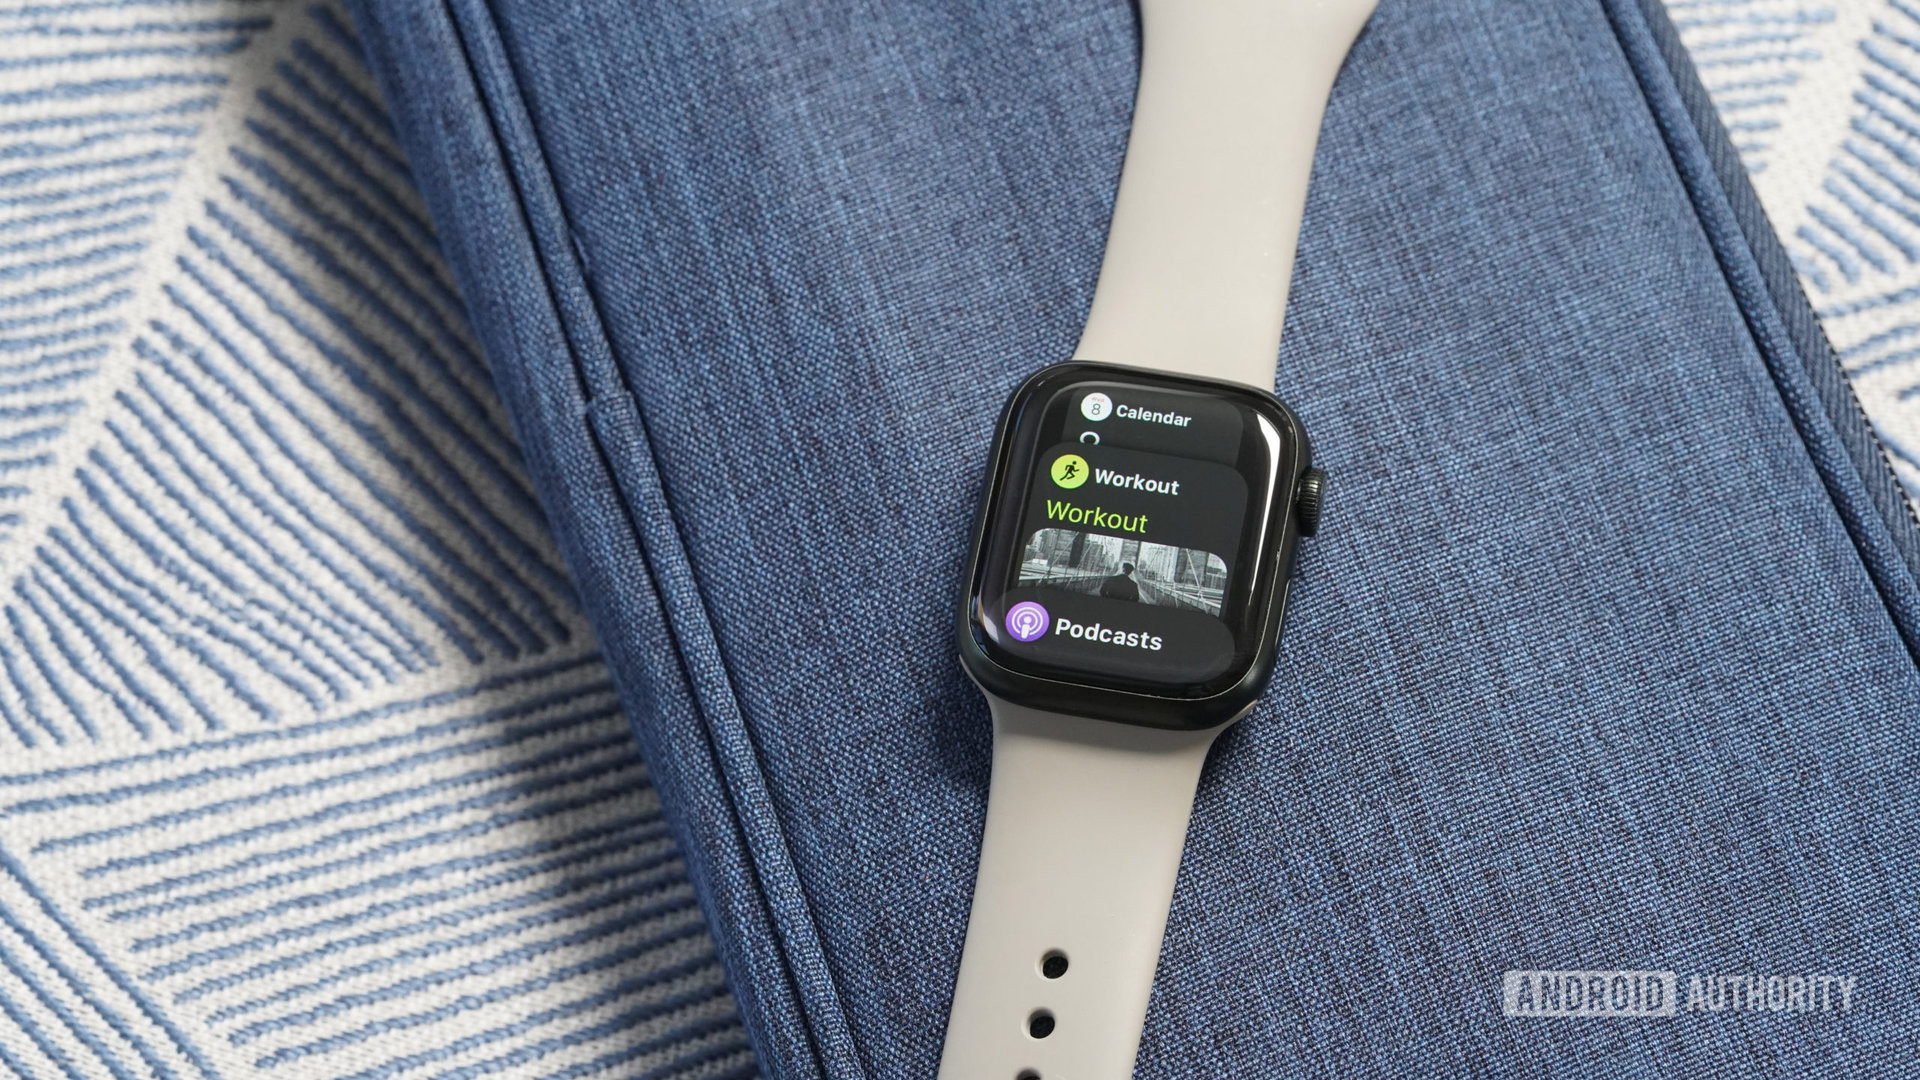 The watchOS 9 software includes a refreshed Dock and upgrades to other native apps including the Calendar, Podcast, and Workout apps.